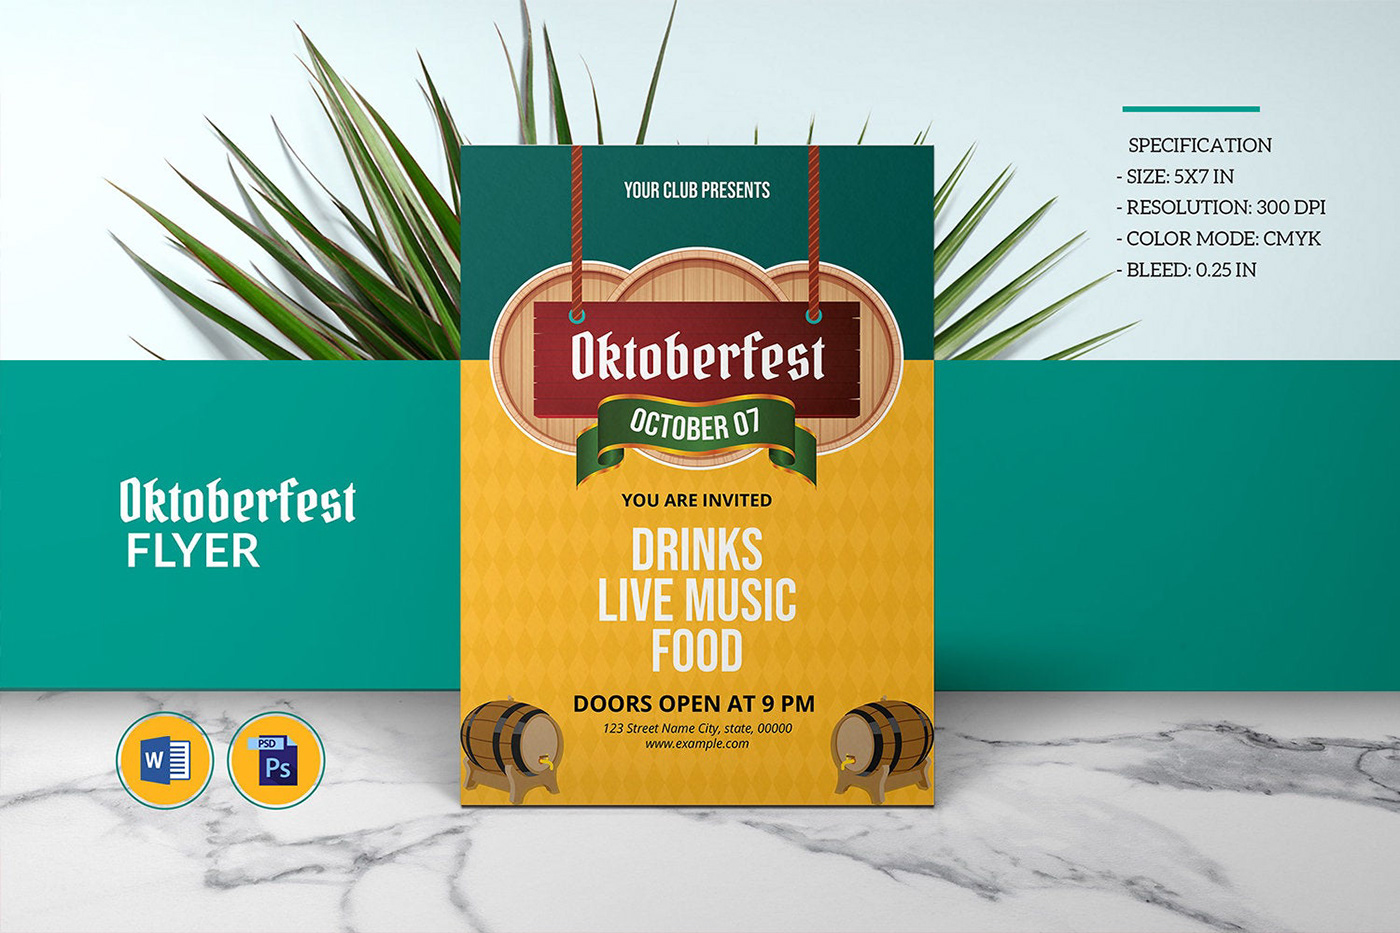 night party party flyer flyers music party oktoberfest octoberfest photoshop template club german MS Word template